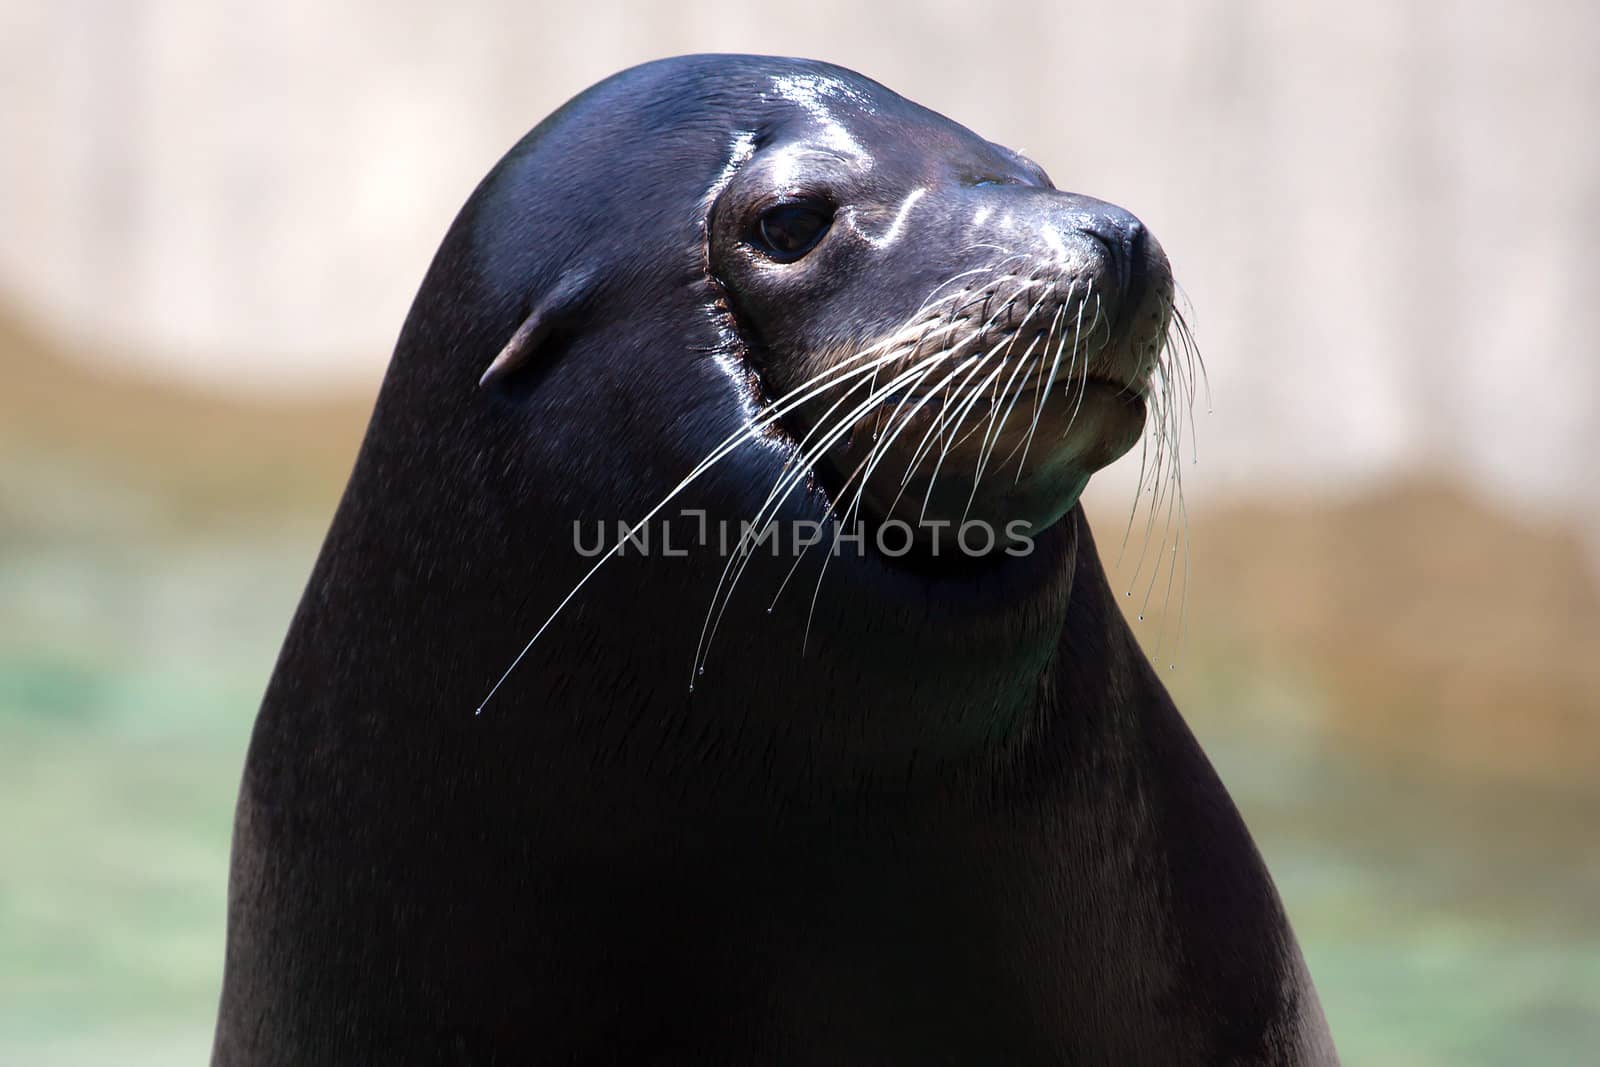 Seal at the zoo by Coffee999